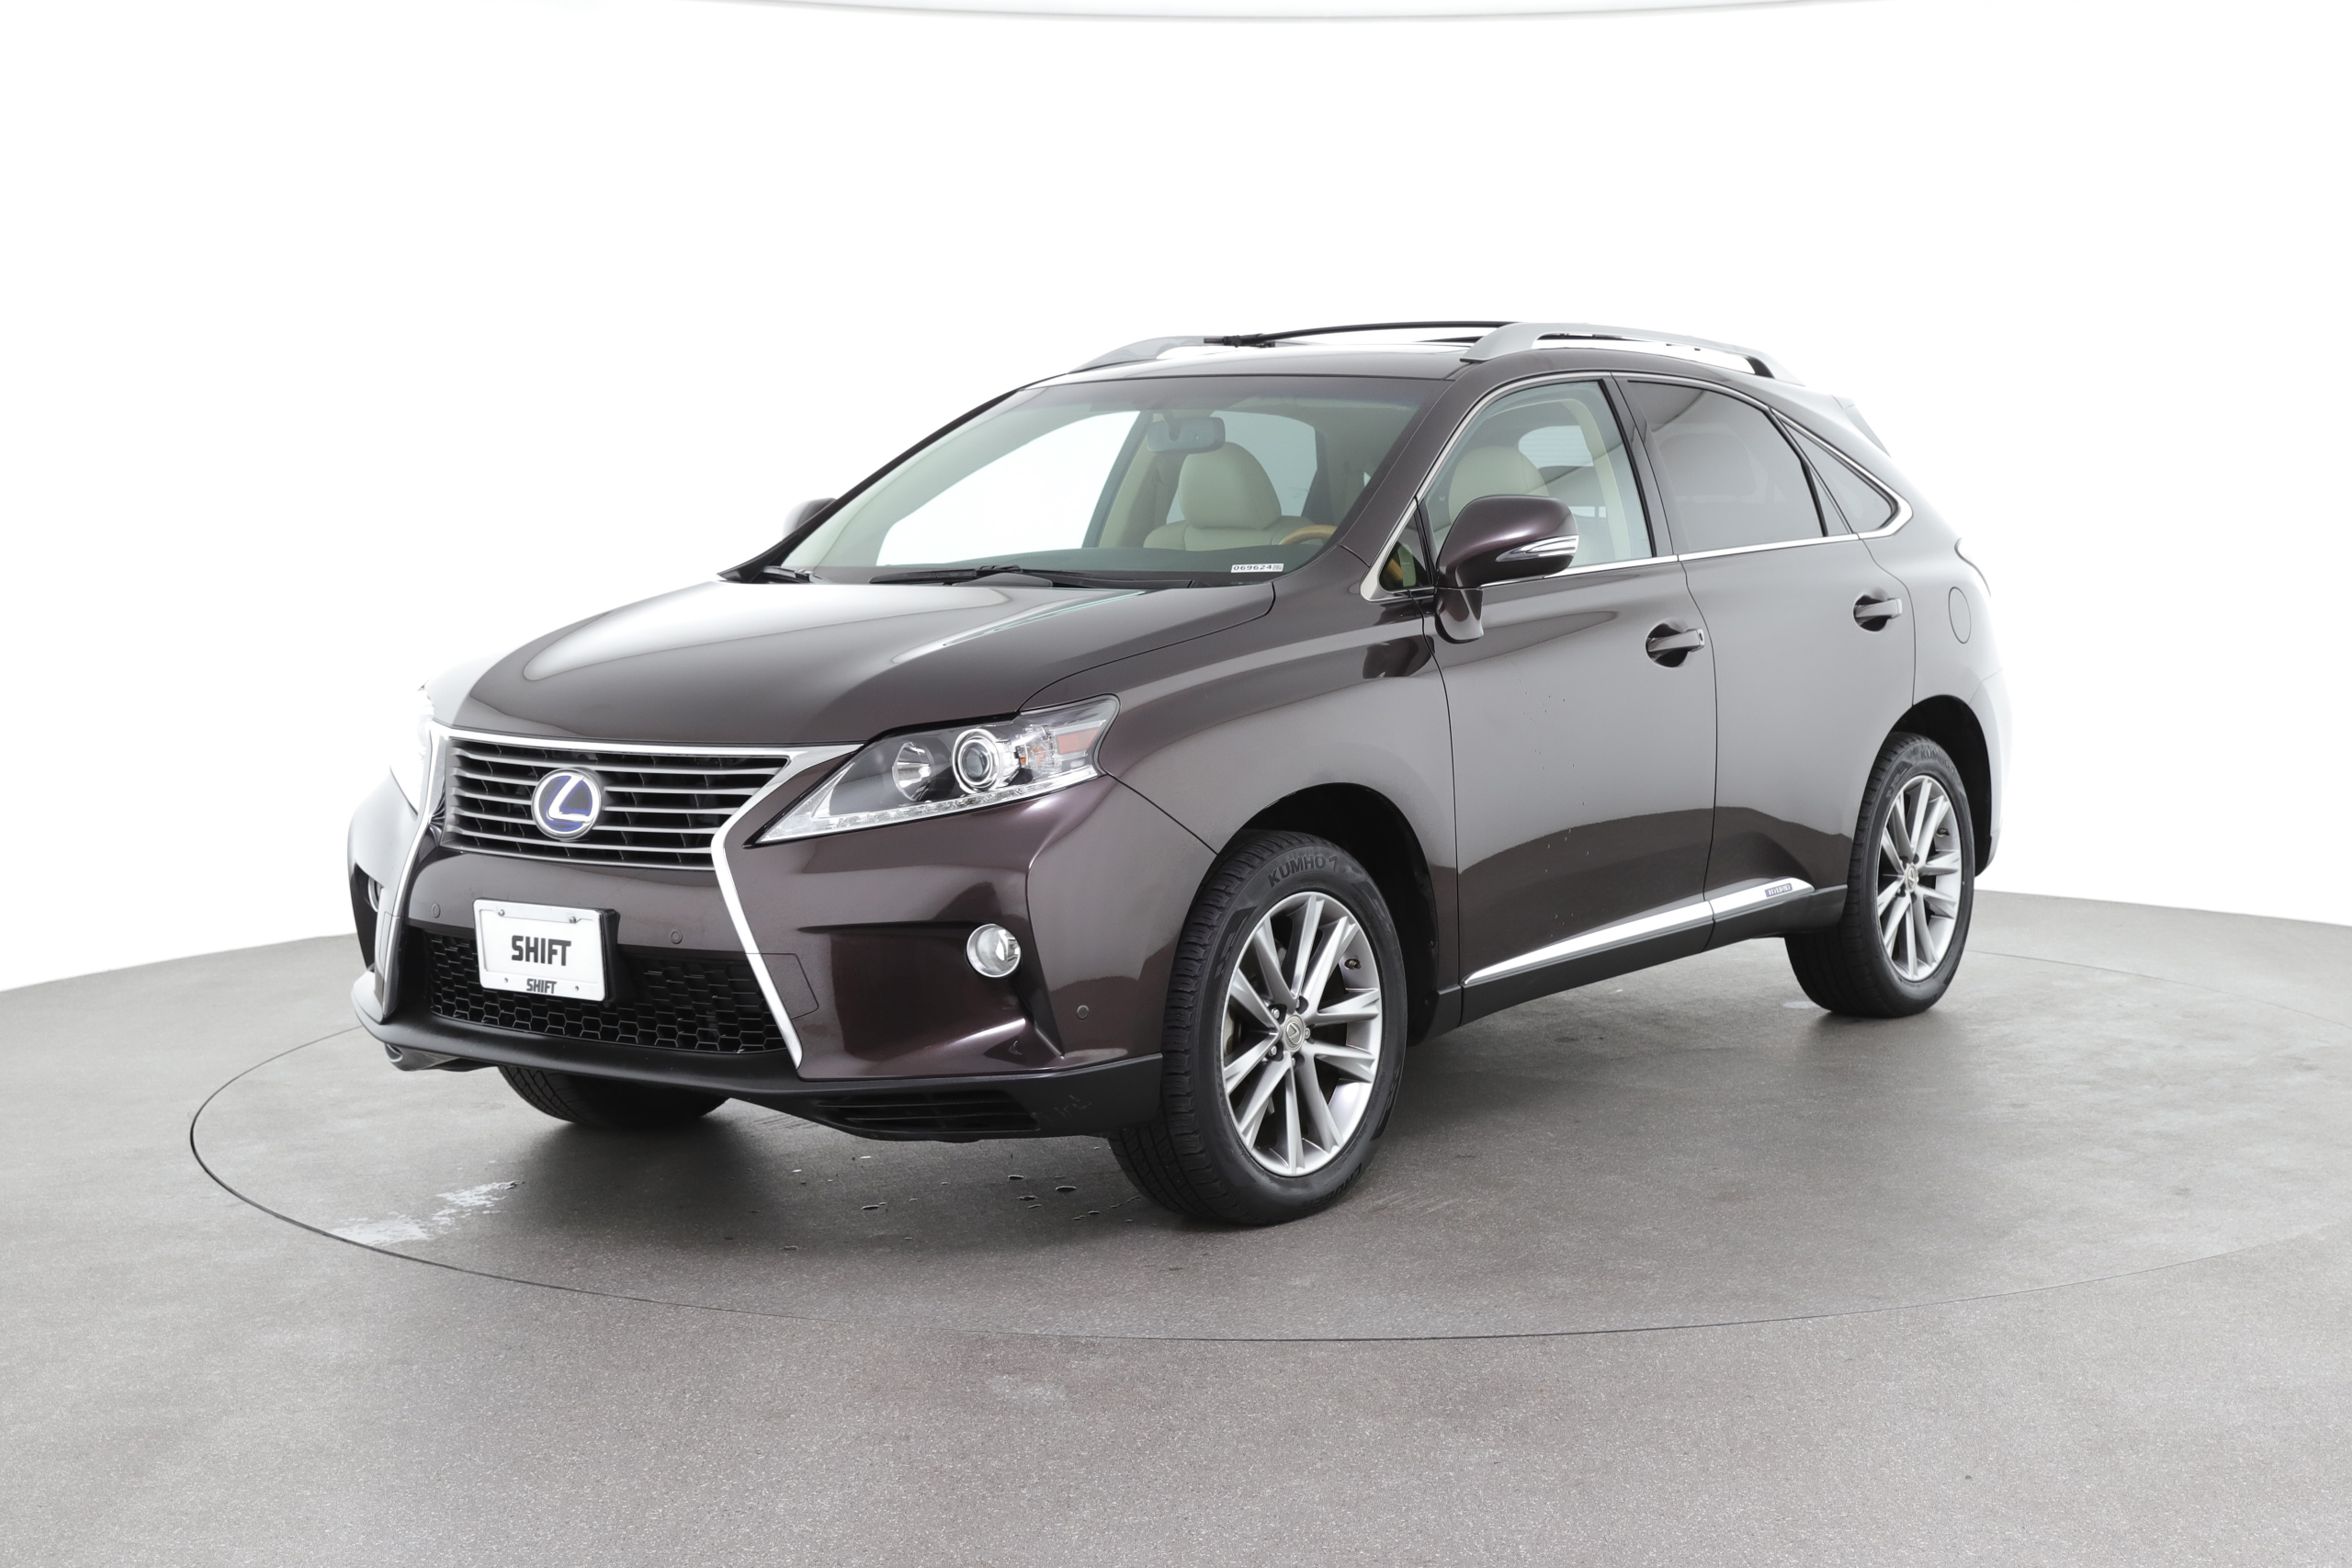 Used 2014 Brown Lexus RX 450h for $24,950